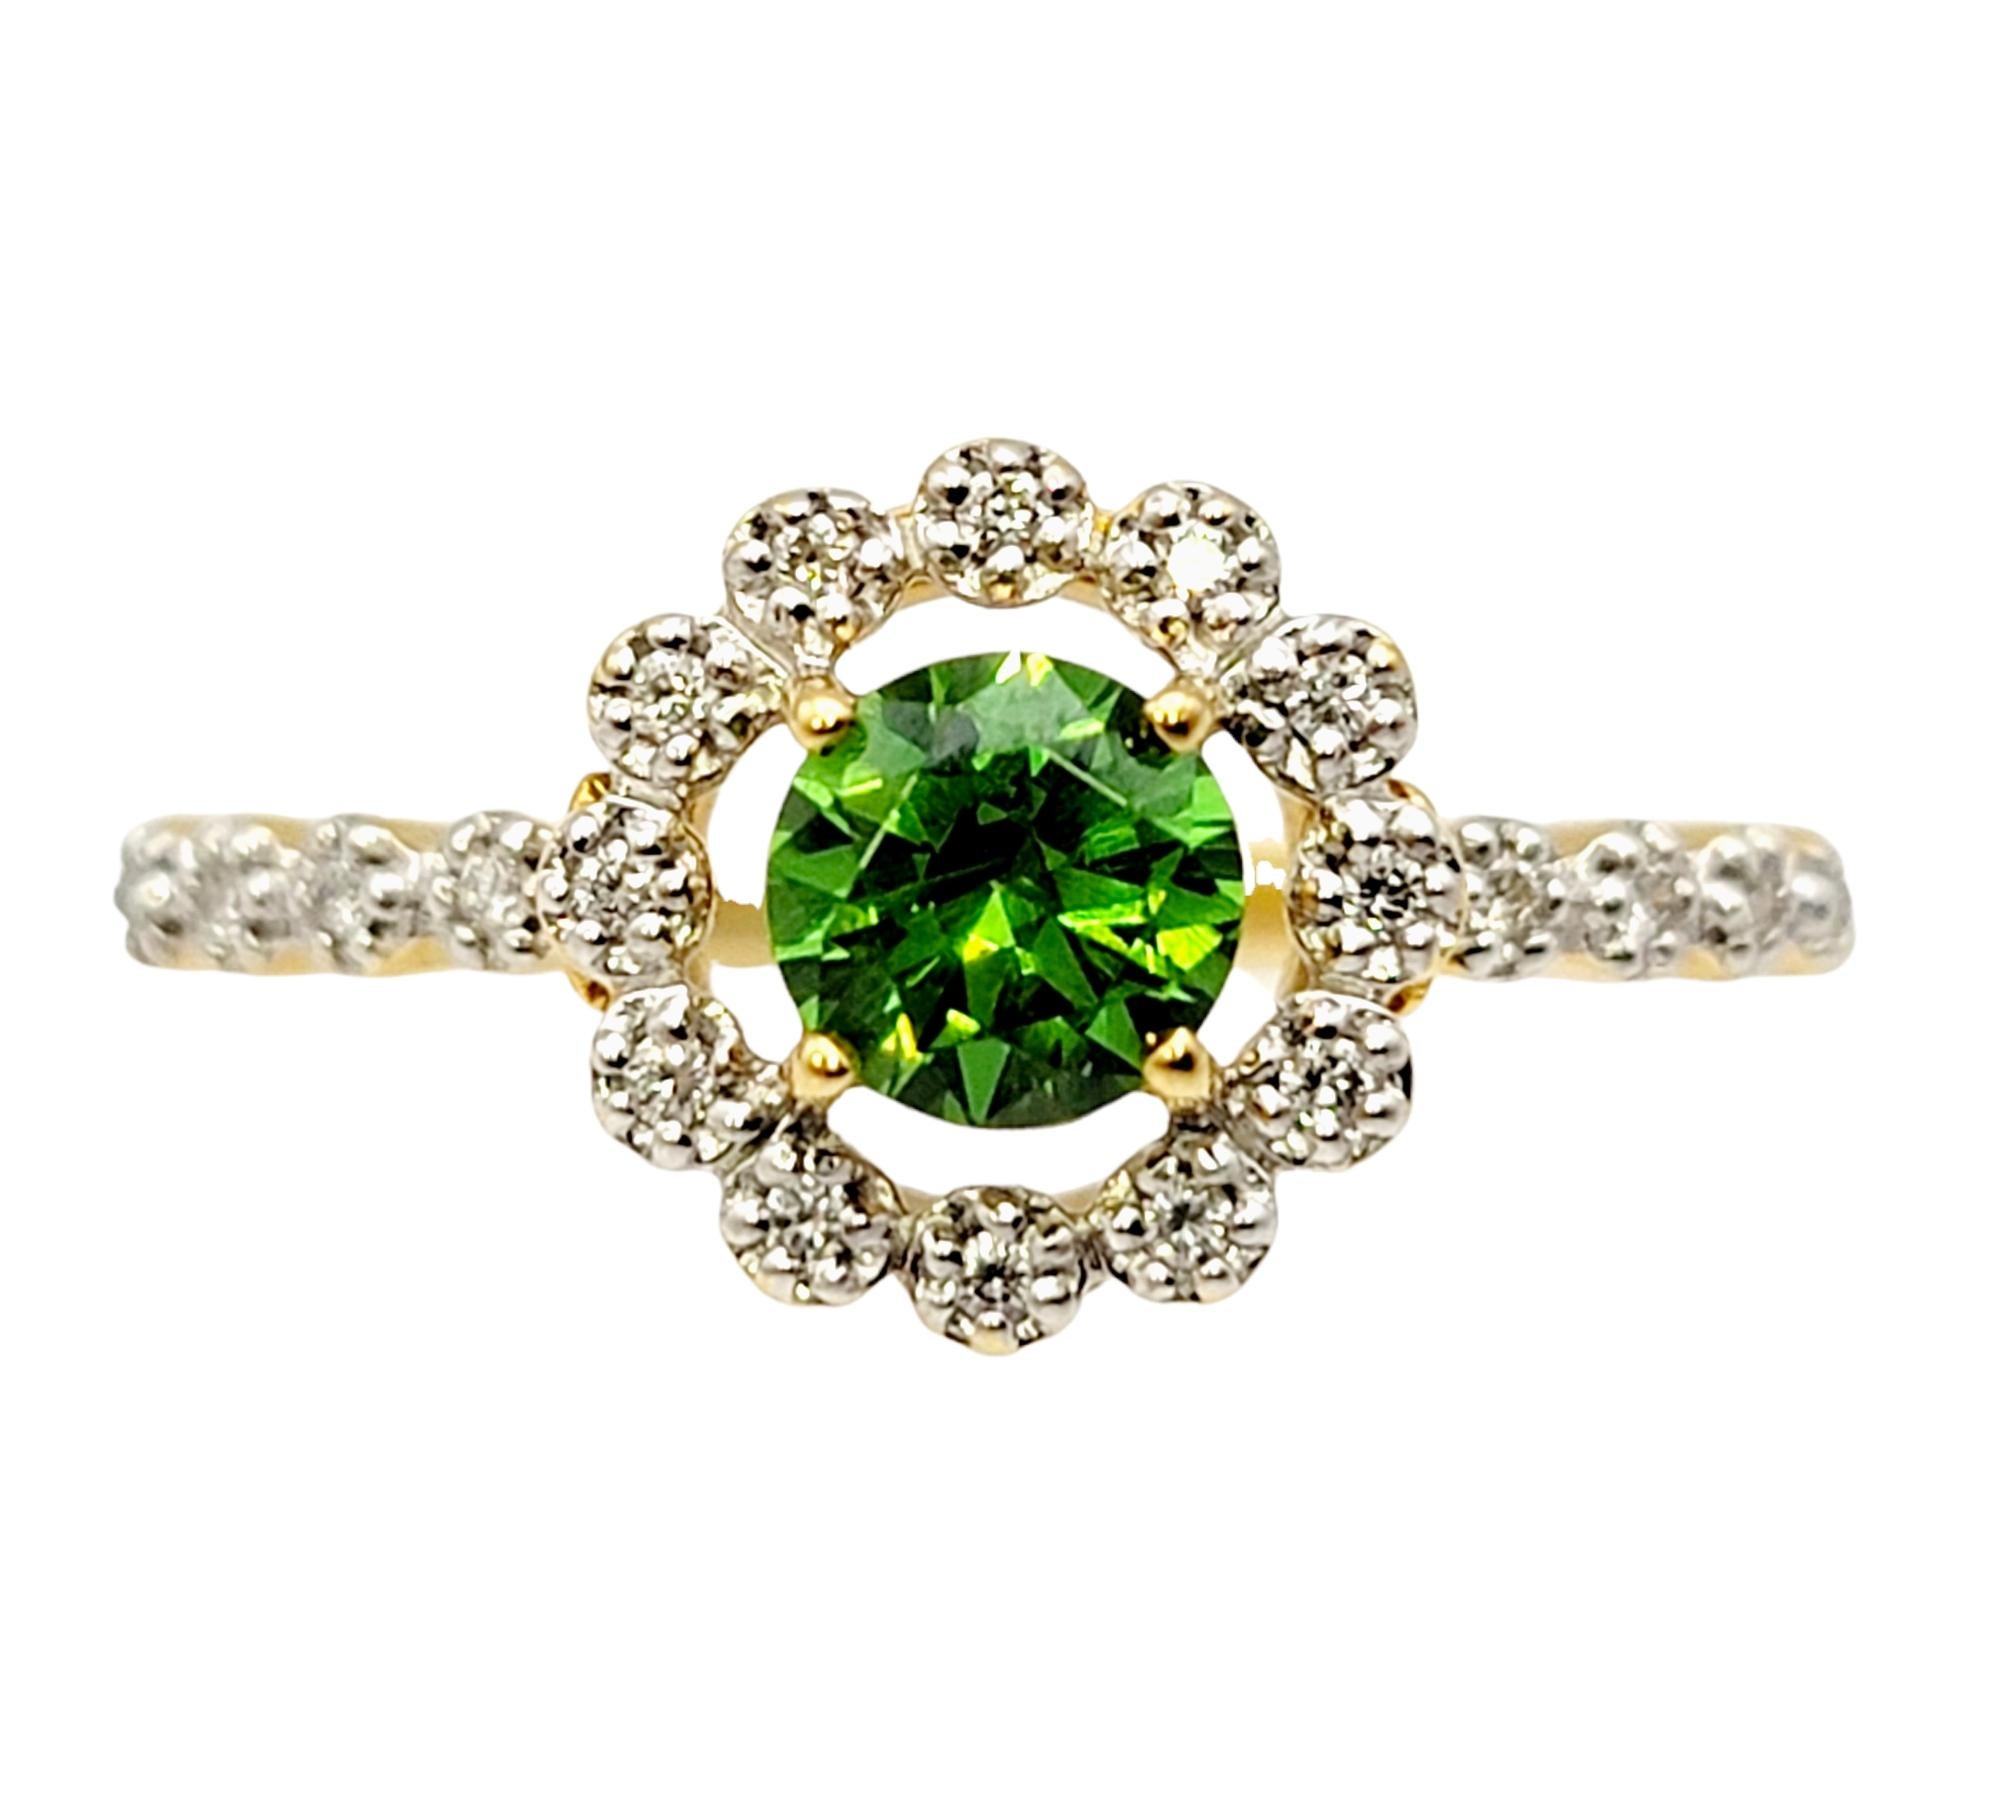 Ring size: 7

The stunning Russian Garnet ring with a dazzling diamond halo with absolutely light up the finger! The striking green center stone is paired with a glittering halo of icy white diamonds, allowing this ultra feminine piece to sparkle